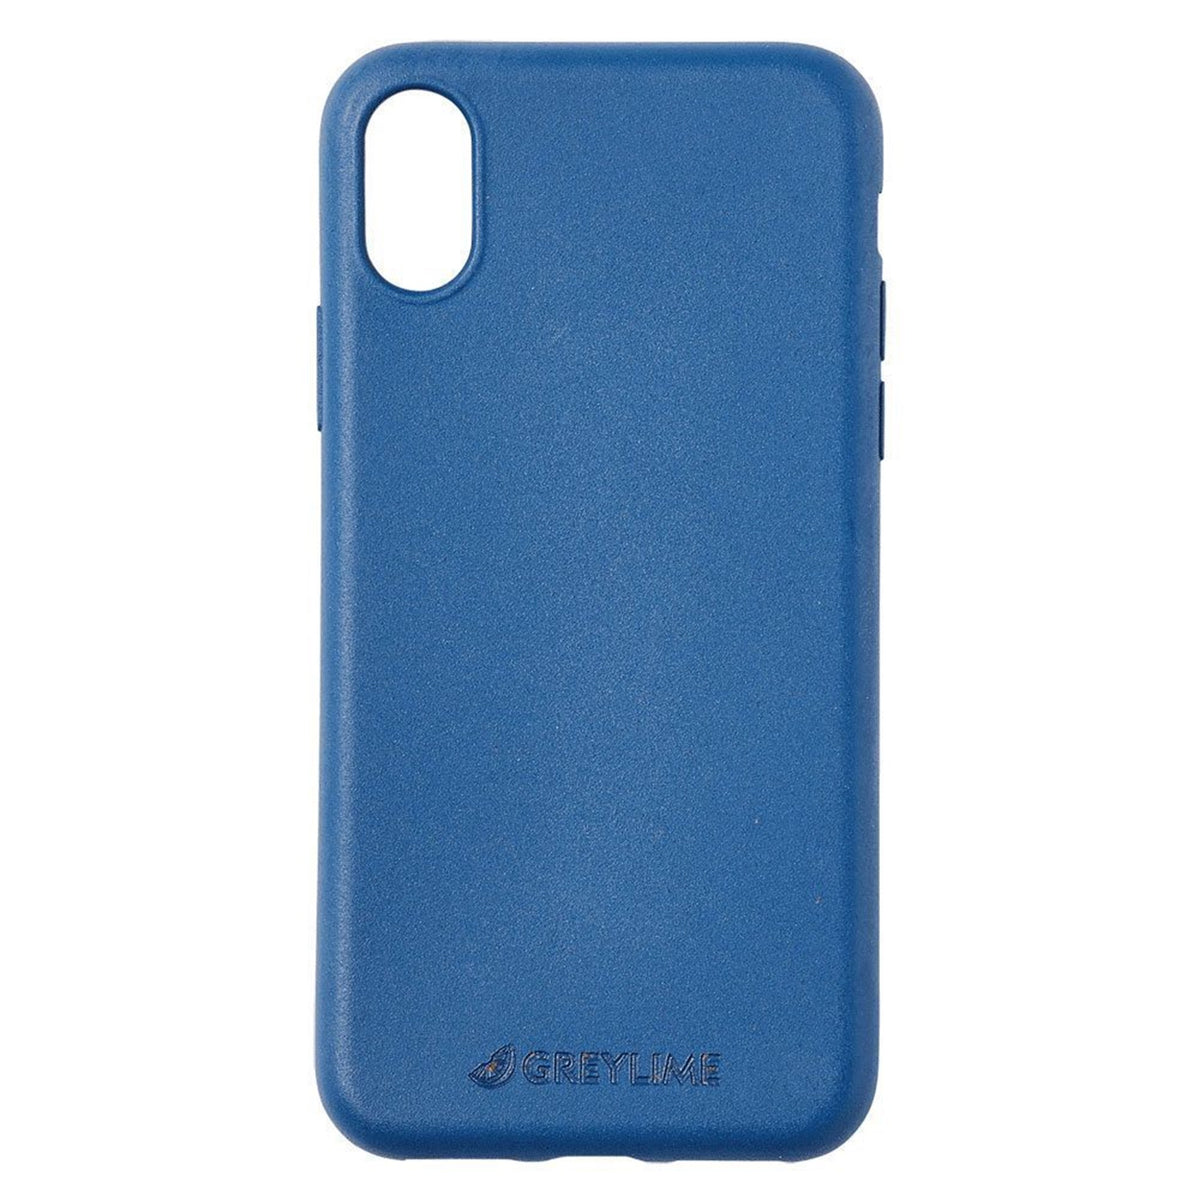 GreyLime-iPhone-X-XS-biodegradable-cover-Navy-blue-COIPXXS03-V4.jpg